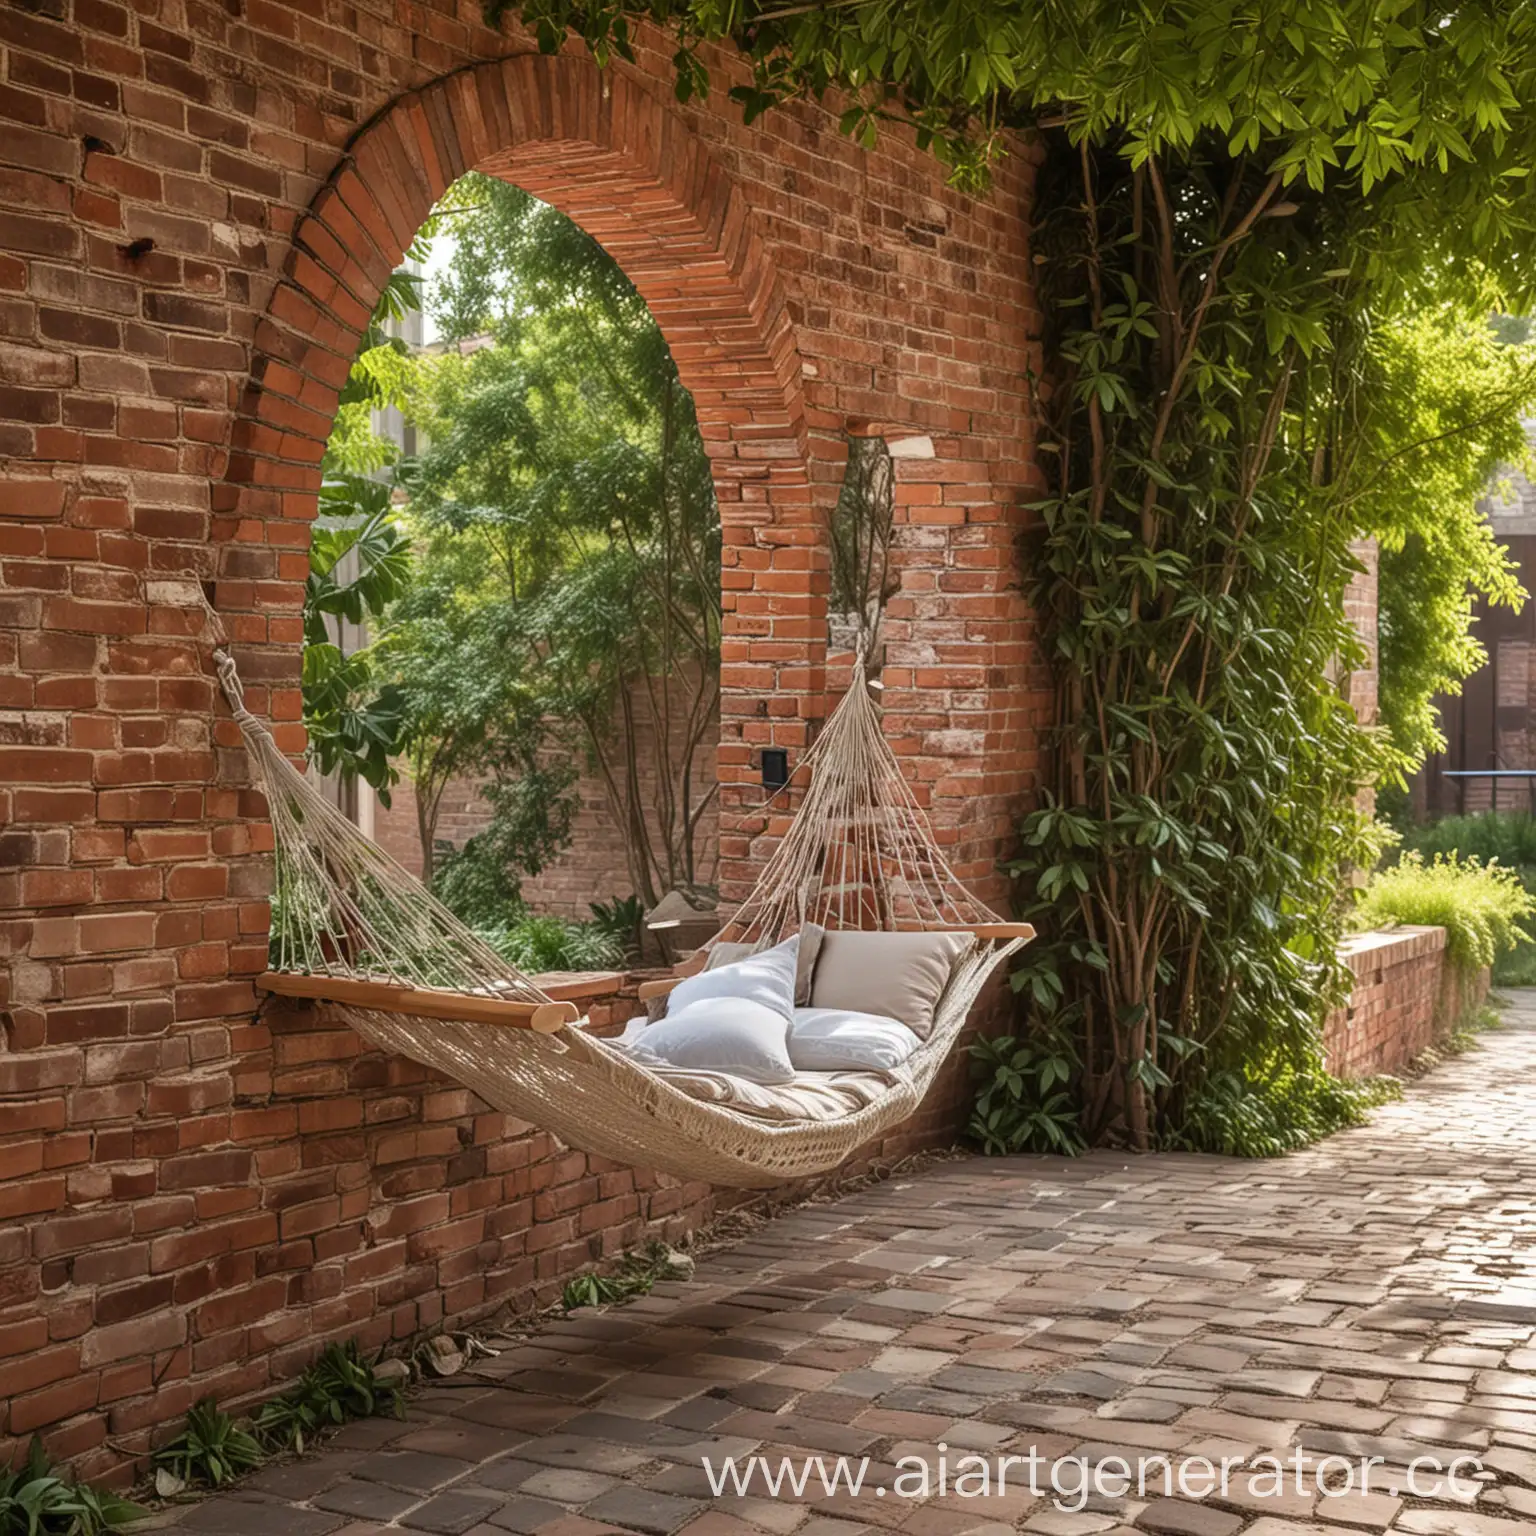 TThe hammock is located between the wall and two brick columns with the background of a brick wall, in the shape of a triangle
There's shade there and you can hide from the sun
To make it comfortable for those who read books to read
The desire to relax, get distracted and read books in the shade is the motivation to visit
Young people, teenagers and children will visit the hammock
Develops the culture and erudition of young people